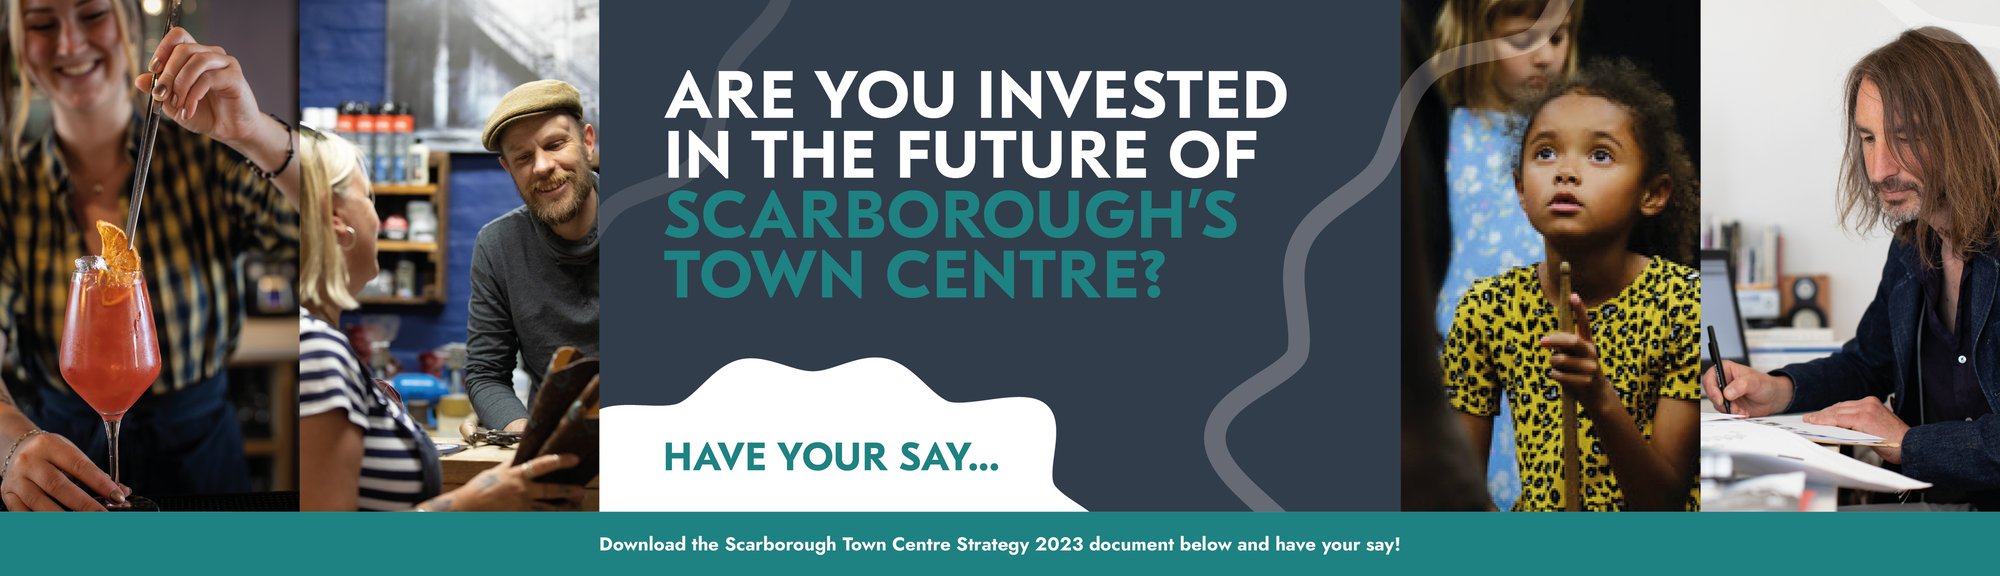 Are you invested in the future of Scarborough's Town Centre? Have your say... Download the Scarborough Town Centre Strategy 2023 document below.